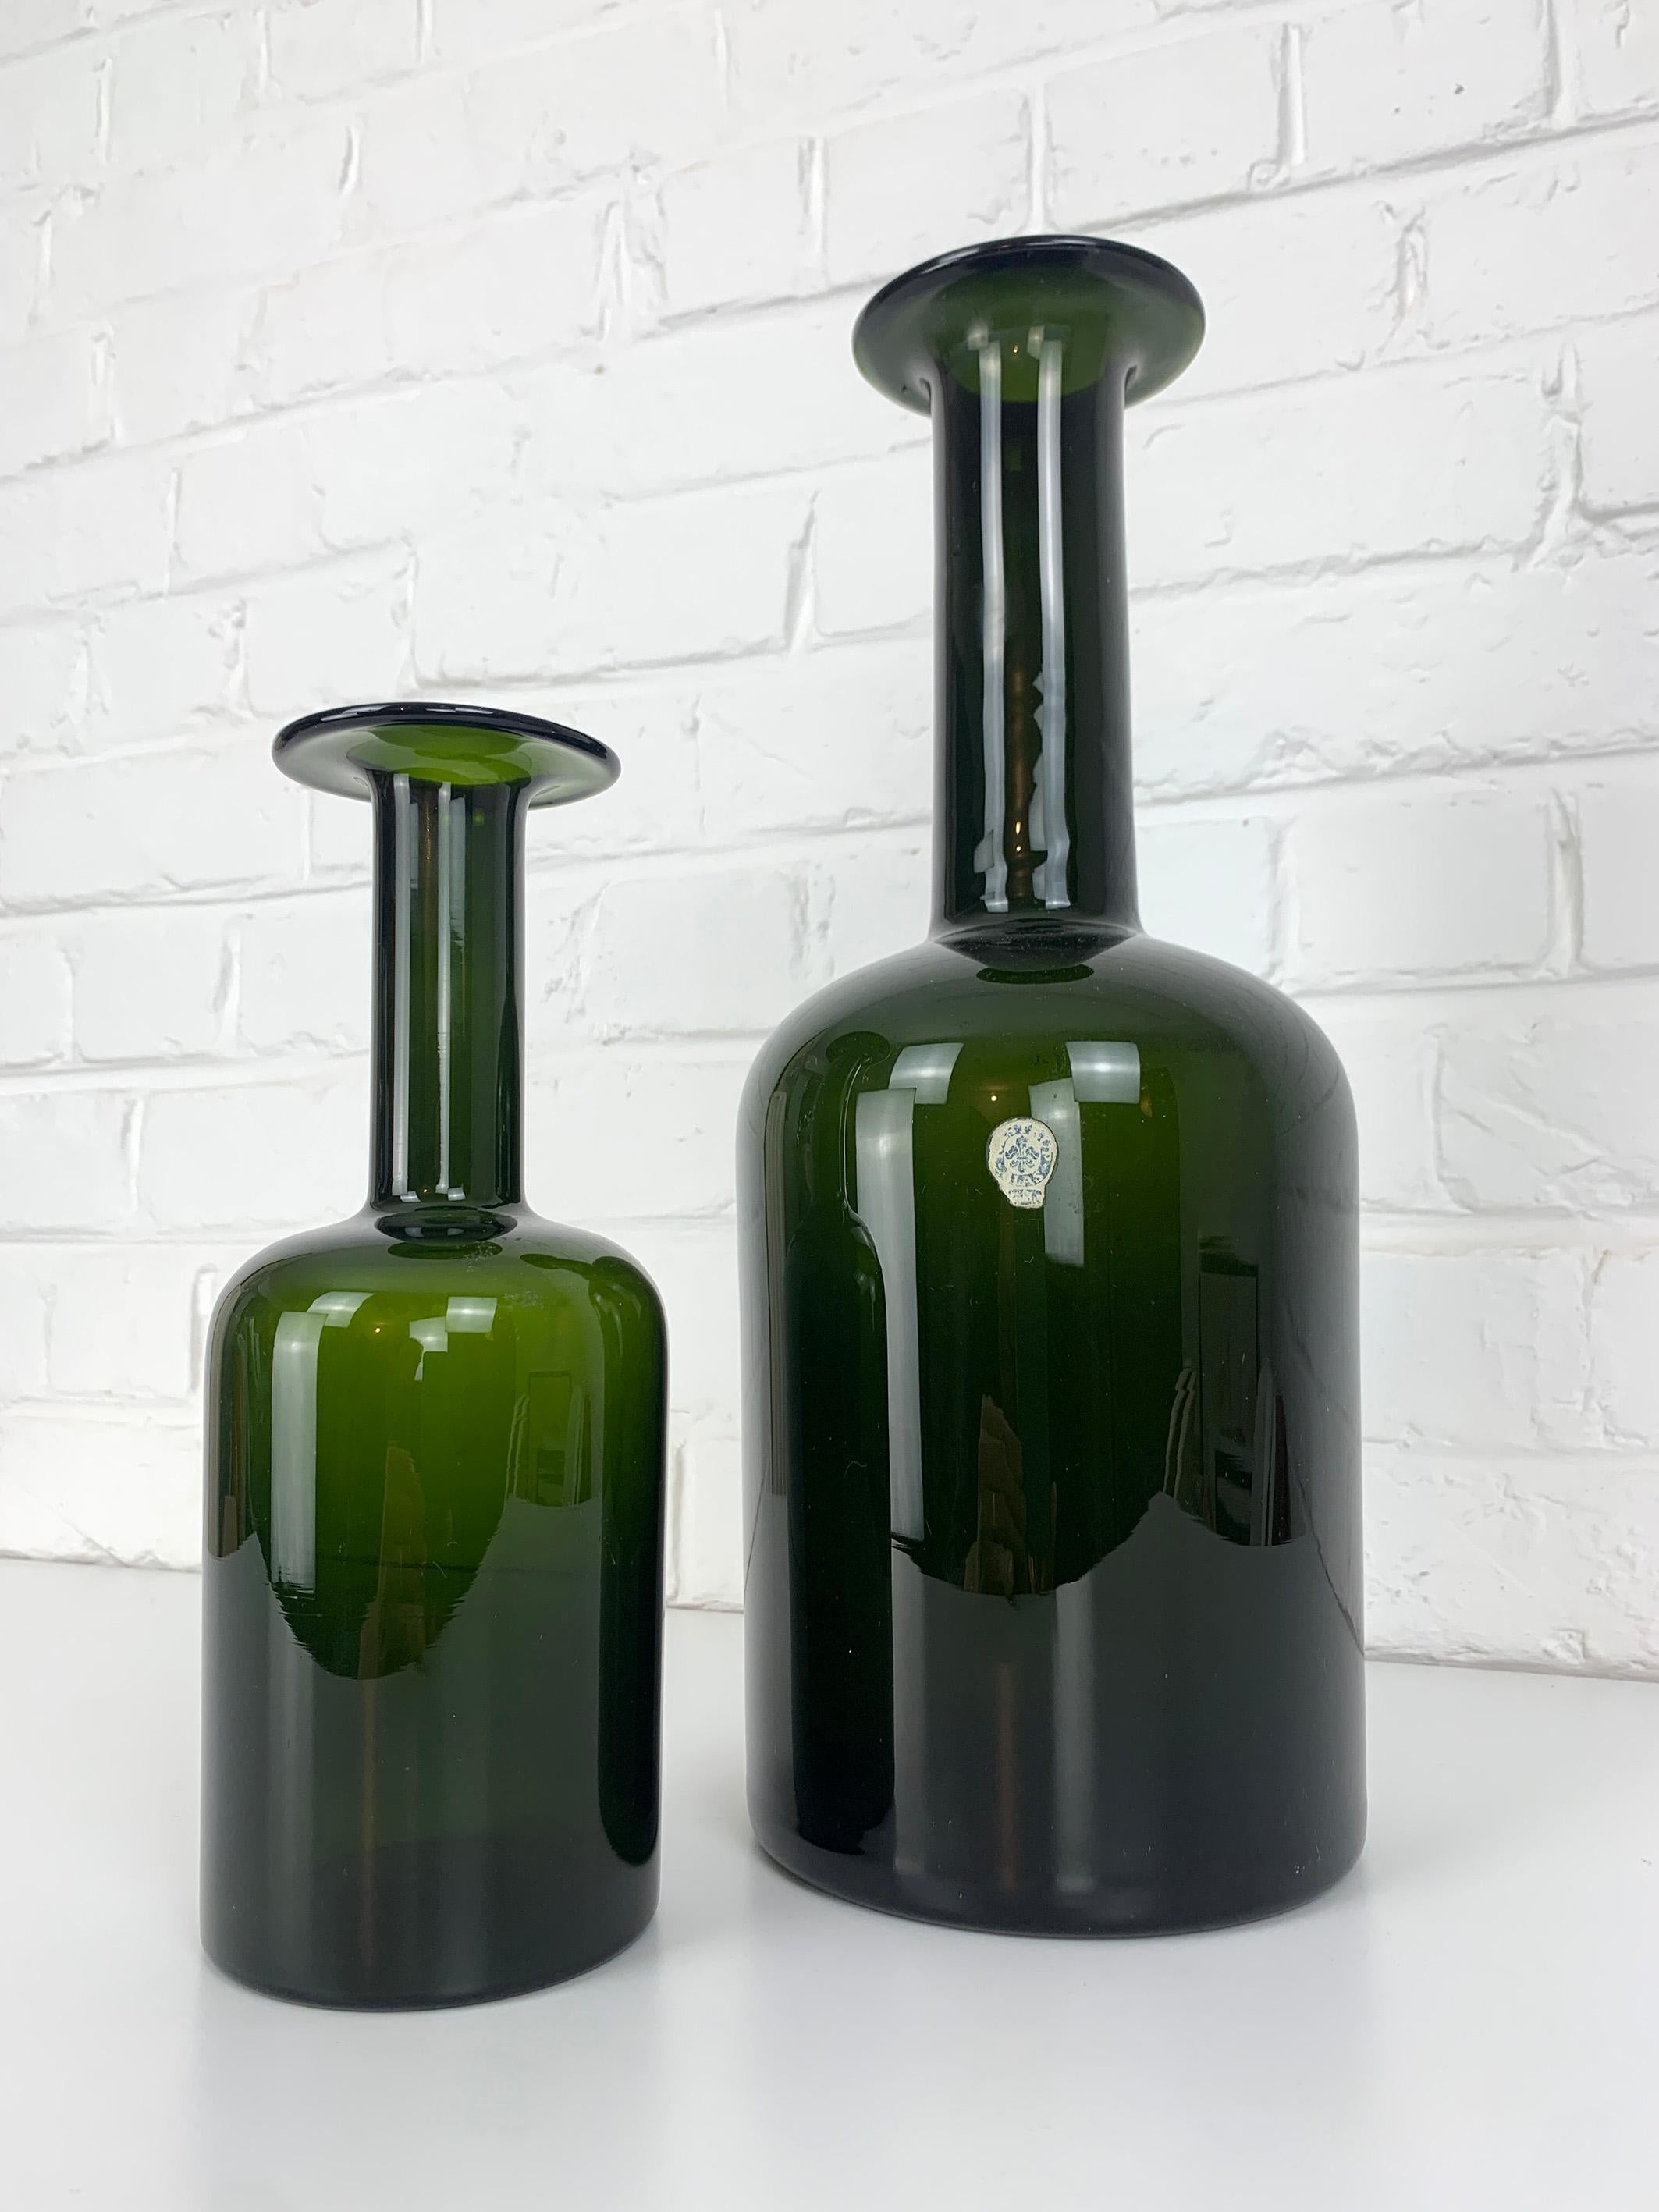 Set of two Mid-Century Holmegaard Gulv-Vases by Otto Brauer, in deep olive green. 

These typical Danish Modern glass bottle vases were manufactured by Kastrup Holmegaard in Denmark during the 1950s or 1960s. The taller vase still retains the